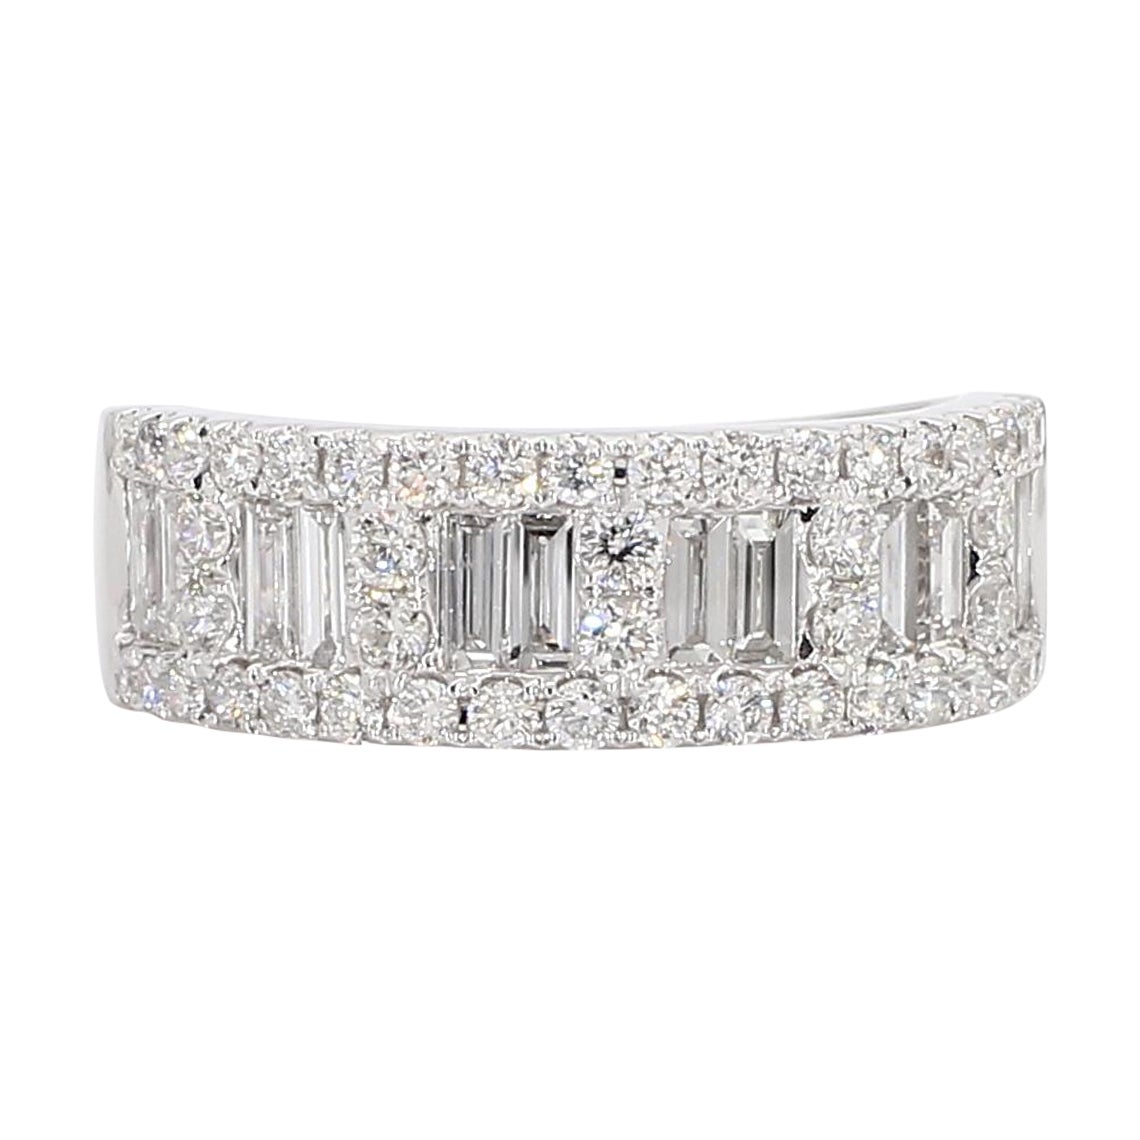 Natural White Baguette Diamond 1.42 Carat TW White Gold Wedding Band For Sale